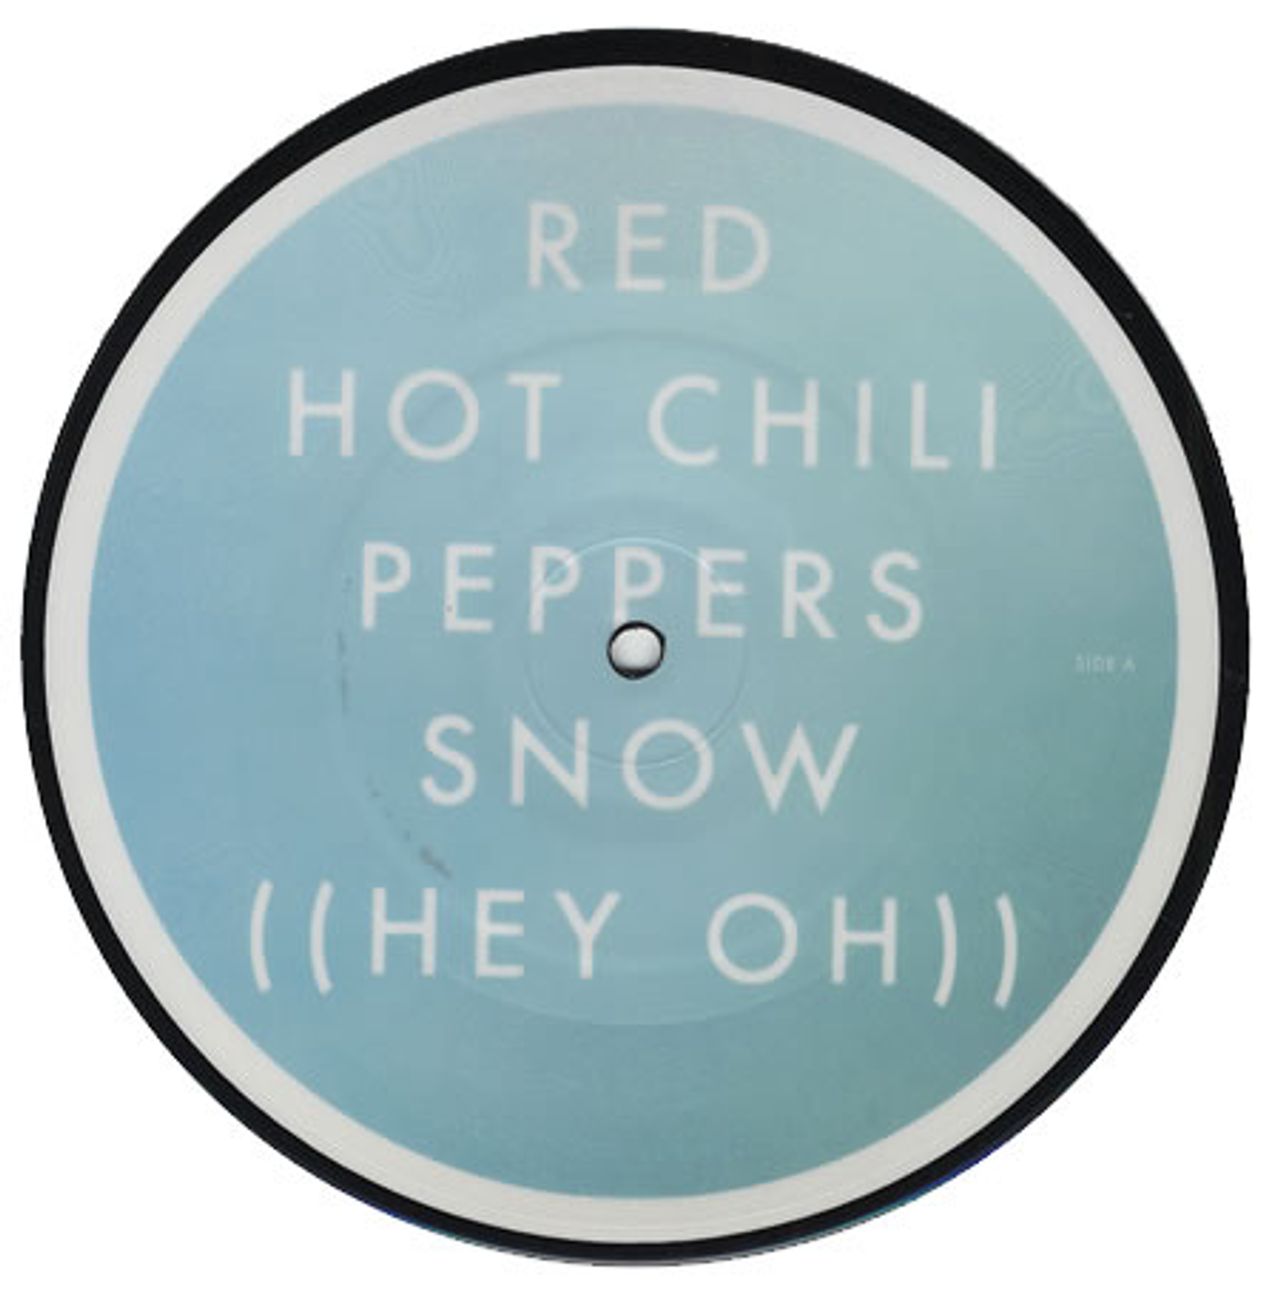 Korrupt Afstem aften Red Hot Chili Peppers Snow [Hey Oh] UK 7" picture disc — RareVinyl.com